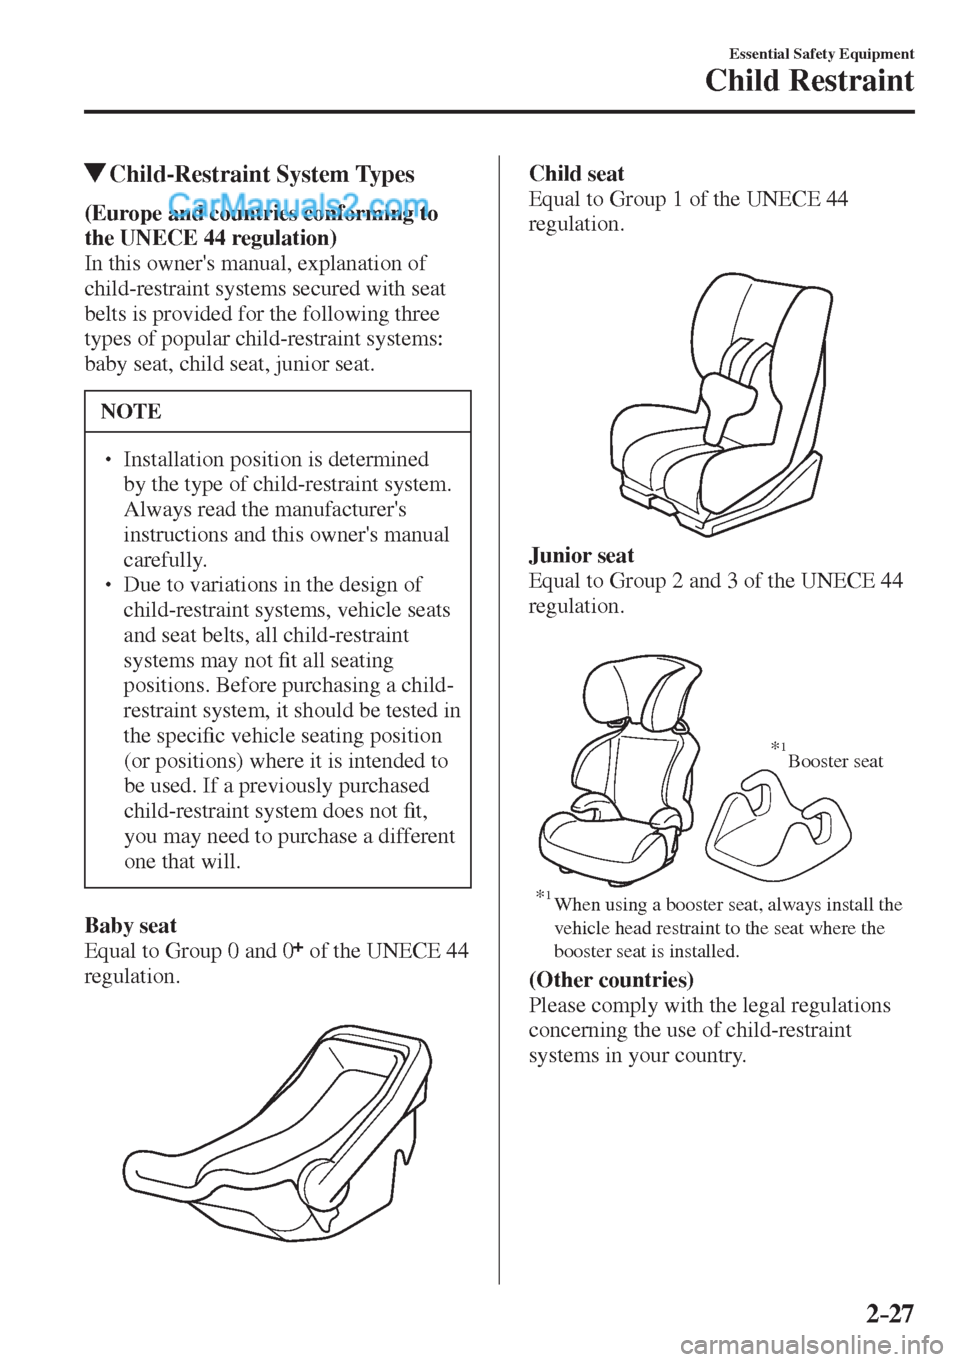 MAZDA MODEL 2 2017   (in English) Service Manual 2–27
Essential Safety Equipment
Child Restraint
          Child-Restraint  System  Types
      (Europe and countries conforming to 
the  UNECE  44 regulation) 
  In this owners manual, explanation 